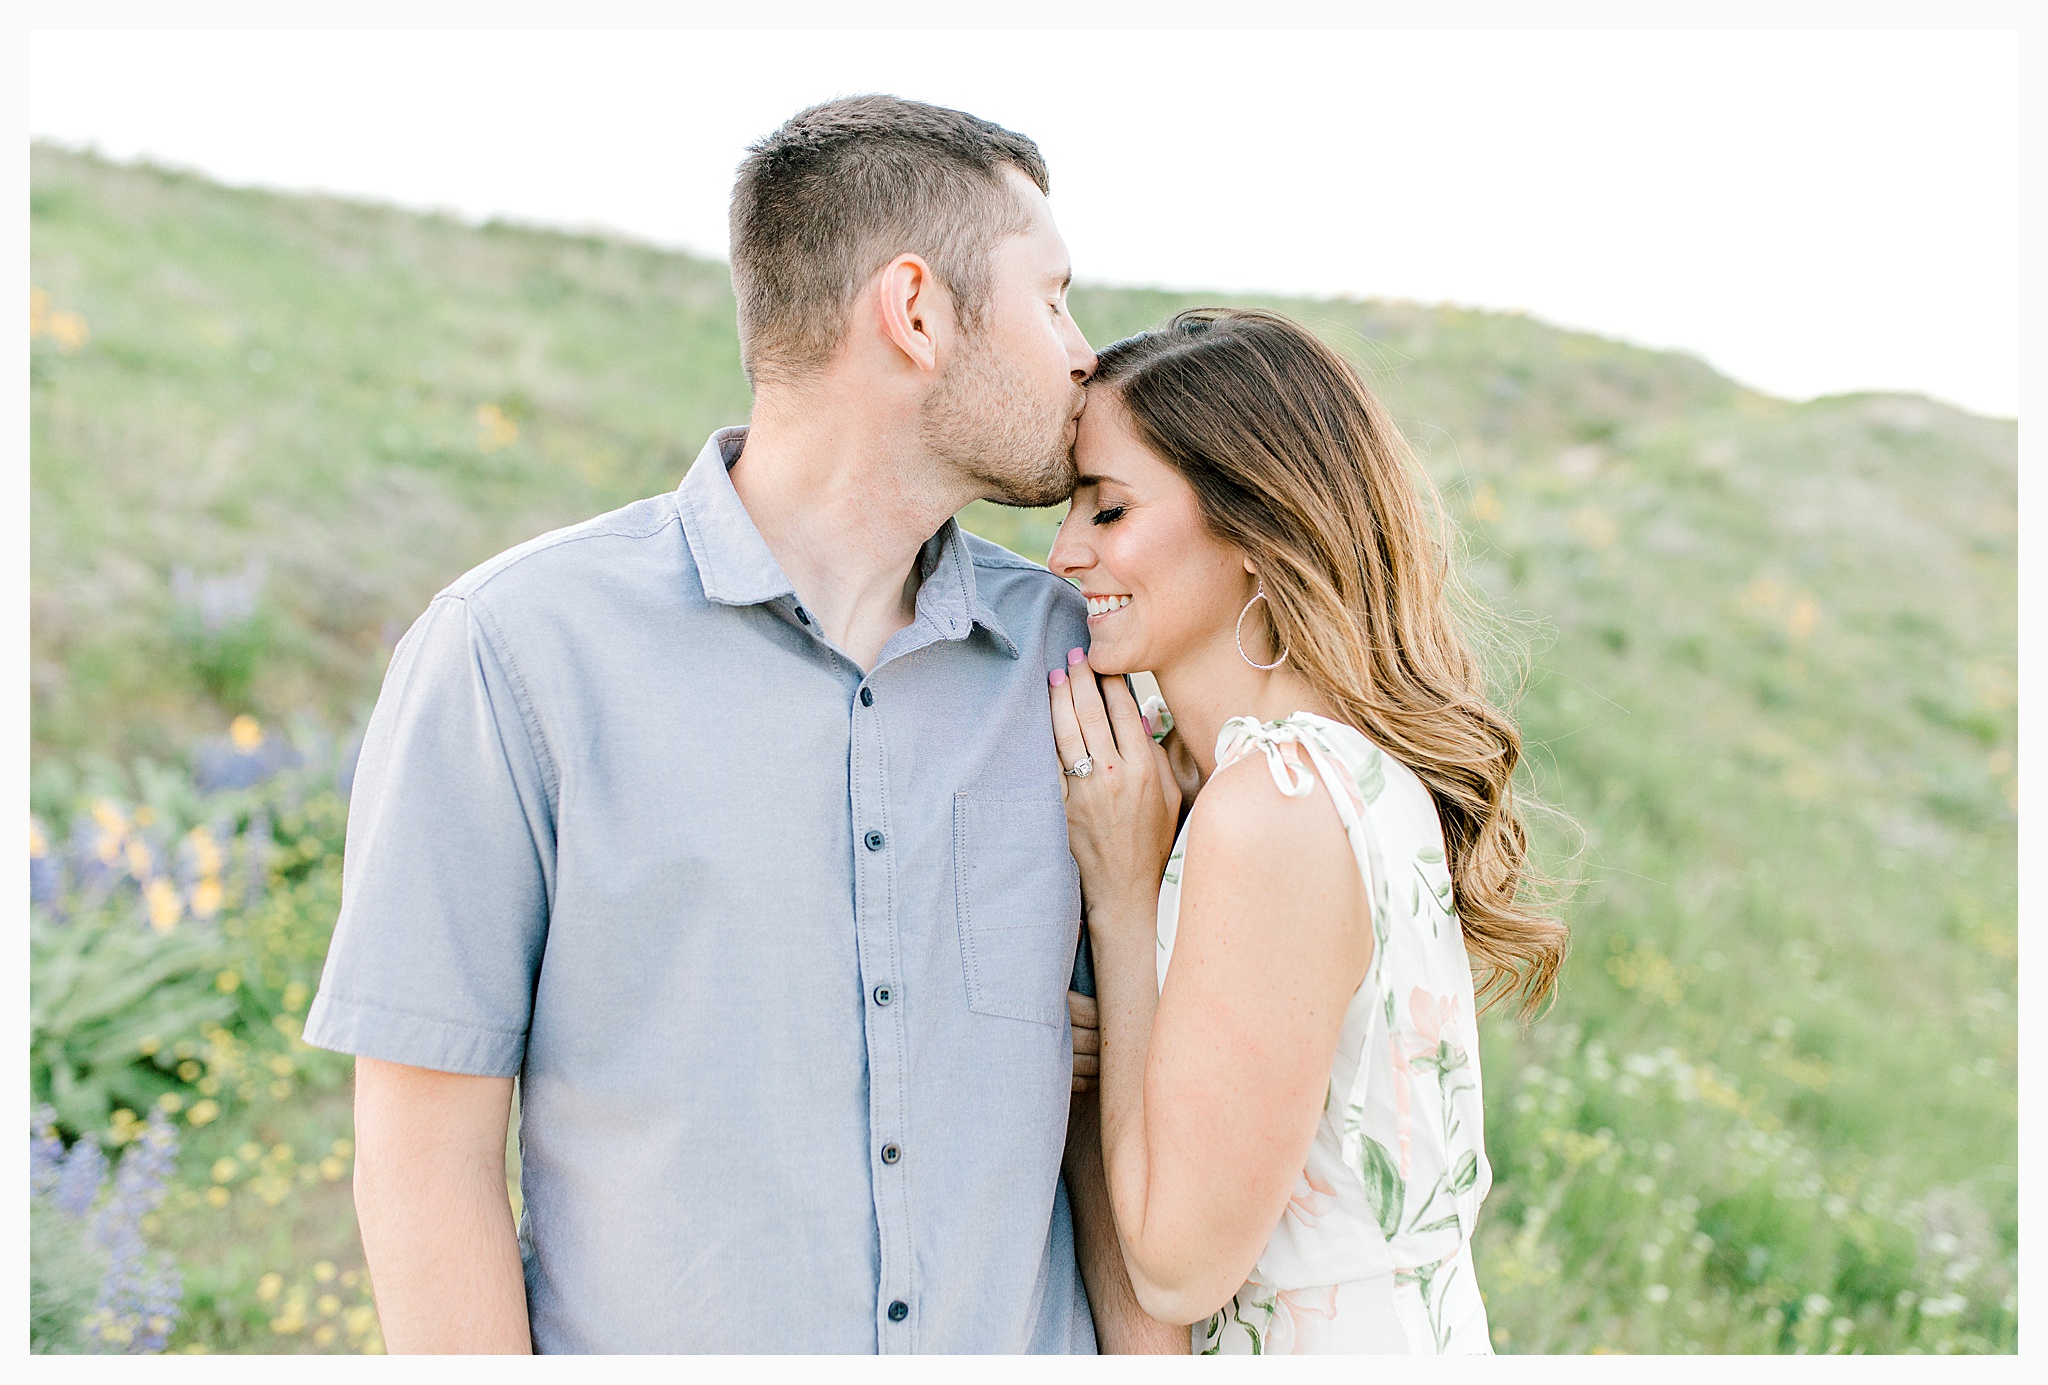 Engagement session amongst the wildflowers in Wenatchee, Washington | Engagement Session Outfit Inspiration for Wedding Photography with Emma Rose Company | Light and Airy PNW Photographer, Seattle Bride_0008.jpg